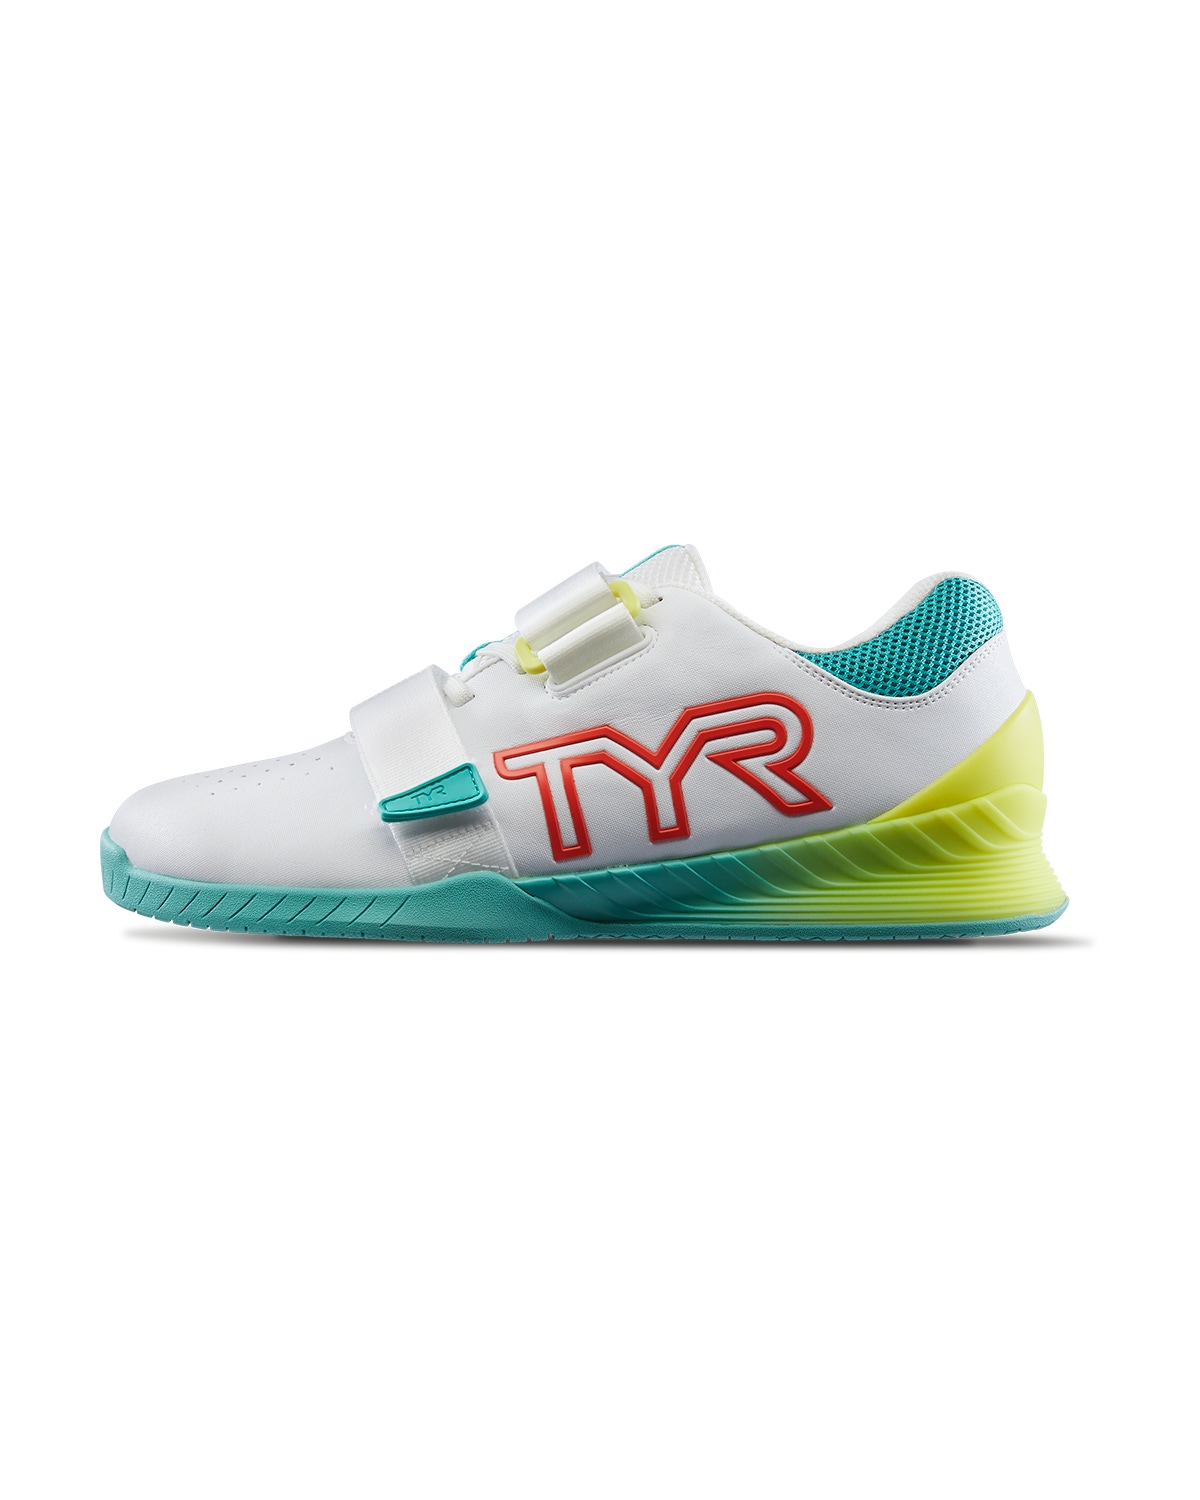 Tyr L-1 Lifter White/Turquoise $98 +shipping $97.99